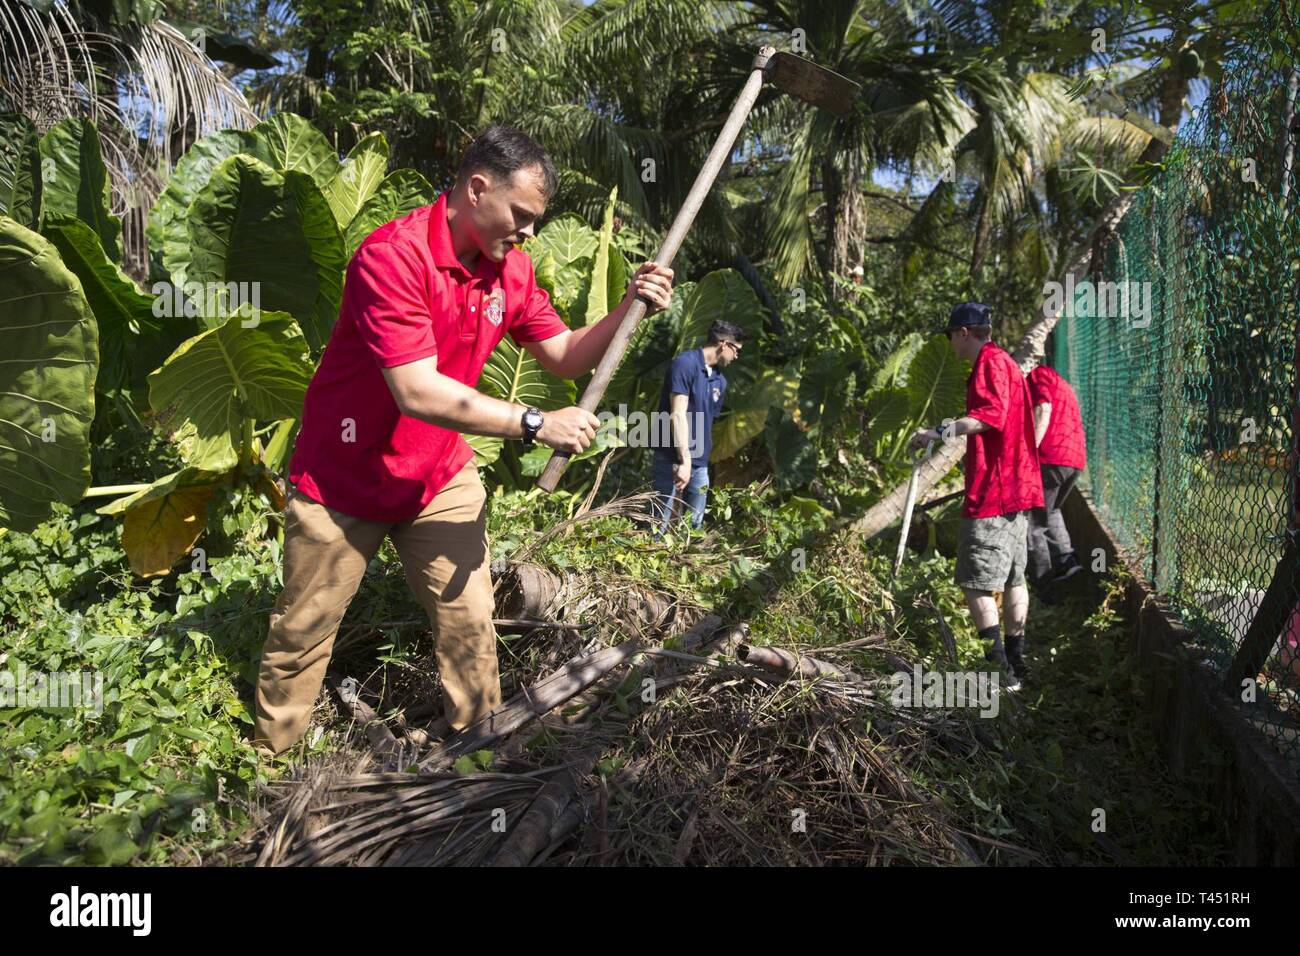 Cpl. John Robinson, a radio operator with Alpha Company, Battalion Landing Team, 1st Battalion, 4th Marines, the “China Marines,” clears vegetation from a fence at the Sabah Cheshire Home and Services during a community relations event in Sabah, Malaysia, Feb. 26, 2019. During the visit, the Marines and Sailors helped clean and renovate the facility by painting, clearing overgrown vegetation, and organizing storage space. Robinson, a native of Lafayette, Louisiana, graduated from Comeaux High School in May 2013 before enlisting in August 2016. Alpha Company Marines are the small boat raid spec Stock Photo